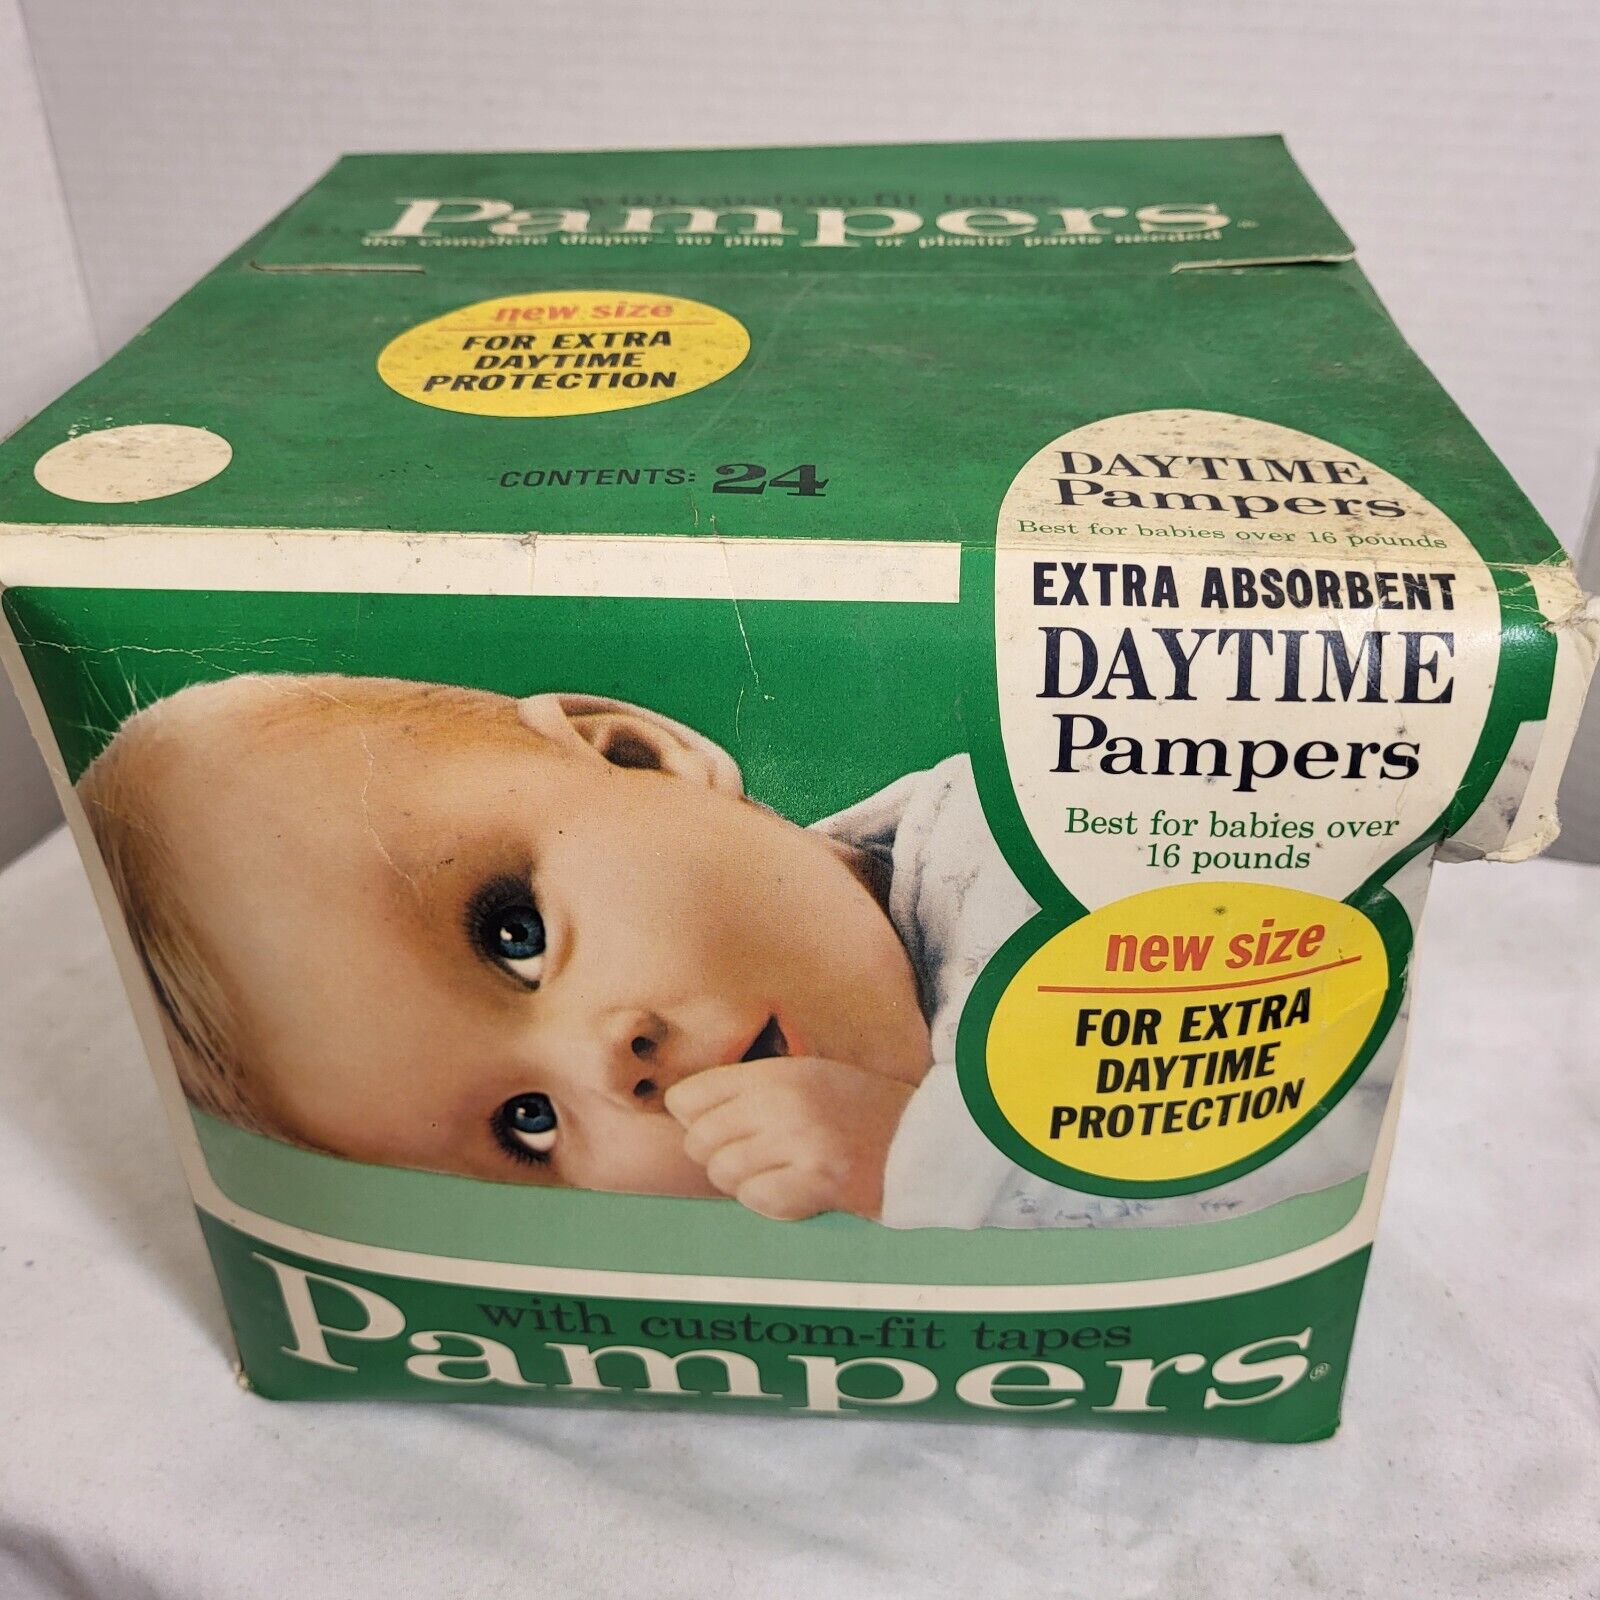 Vintage 1960s Pampers Daytime Diapers 24ct Open Box Over 16lbs